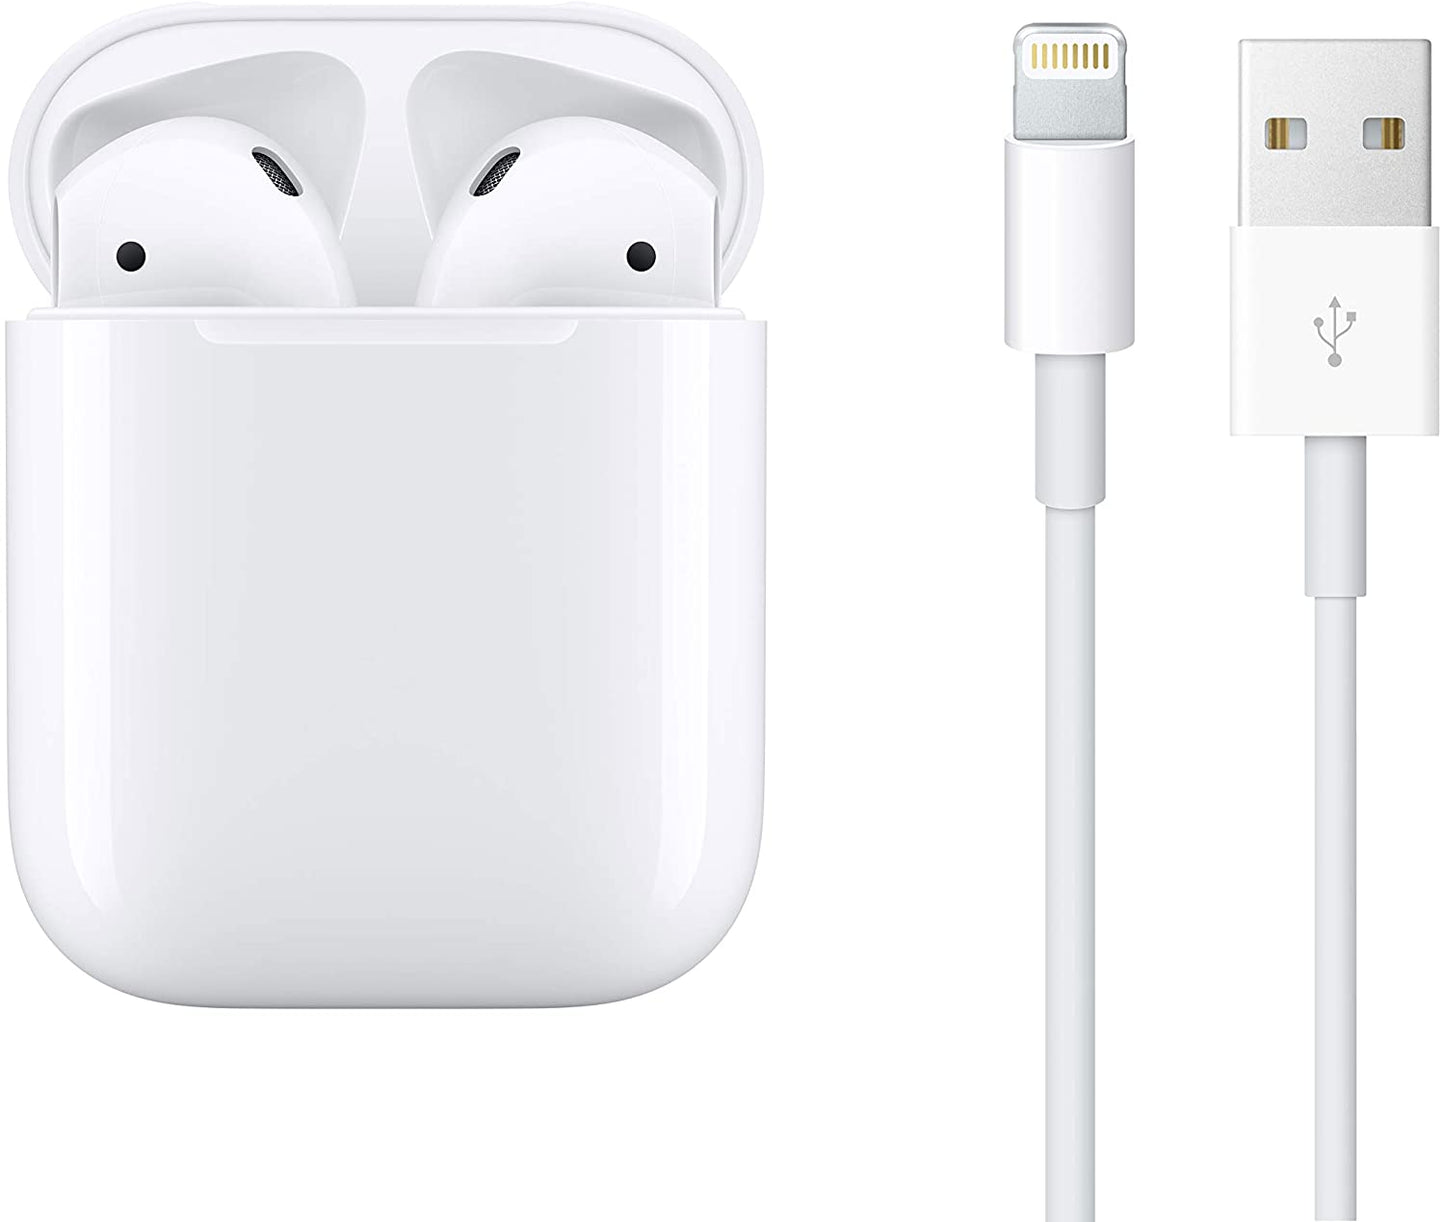 Airpods 2nd Gen (Open Packaging - Almost New)